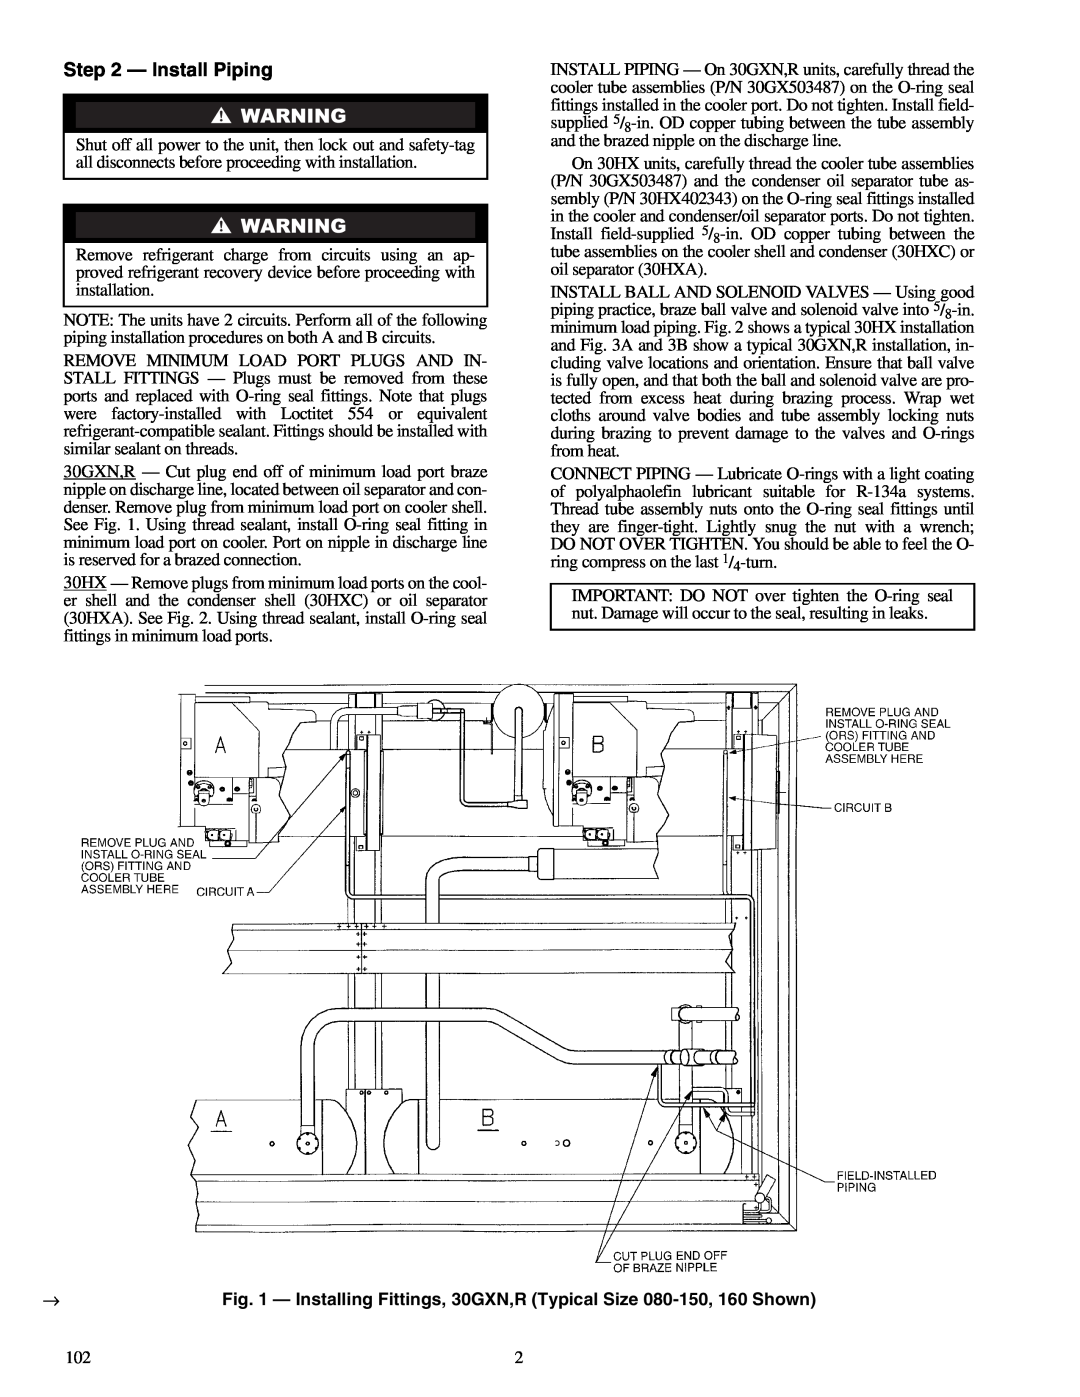 Carrier R080-528 installation instructions Install Piping, Installing Fittings, 30GXN,R Typical Size 080-150, 160 Shown 